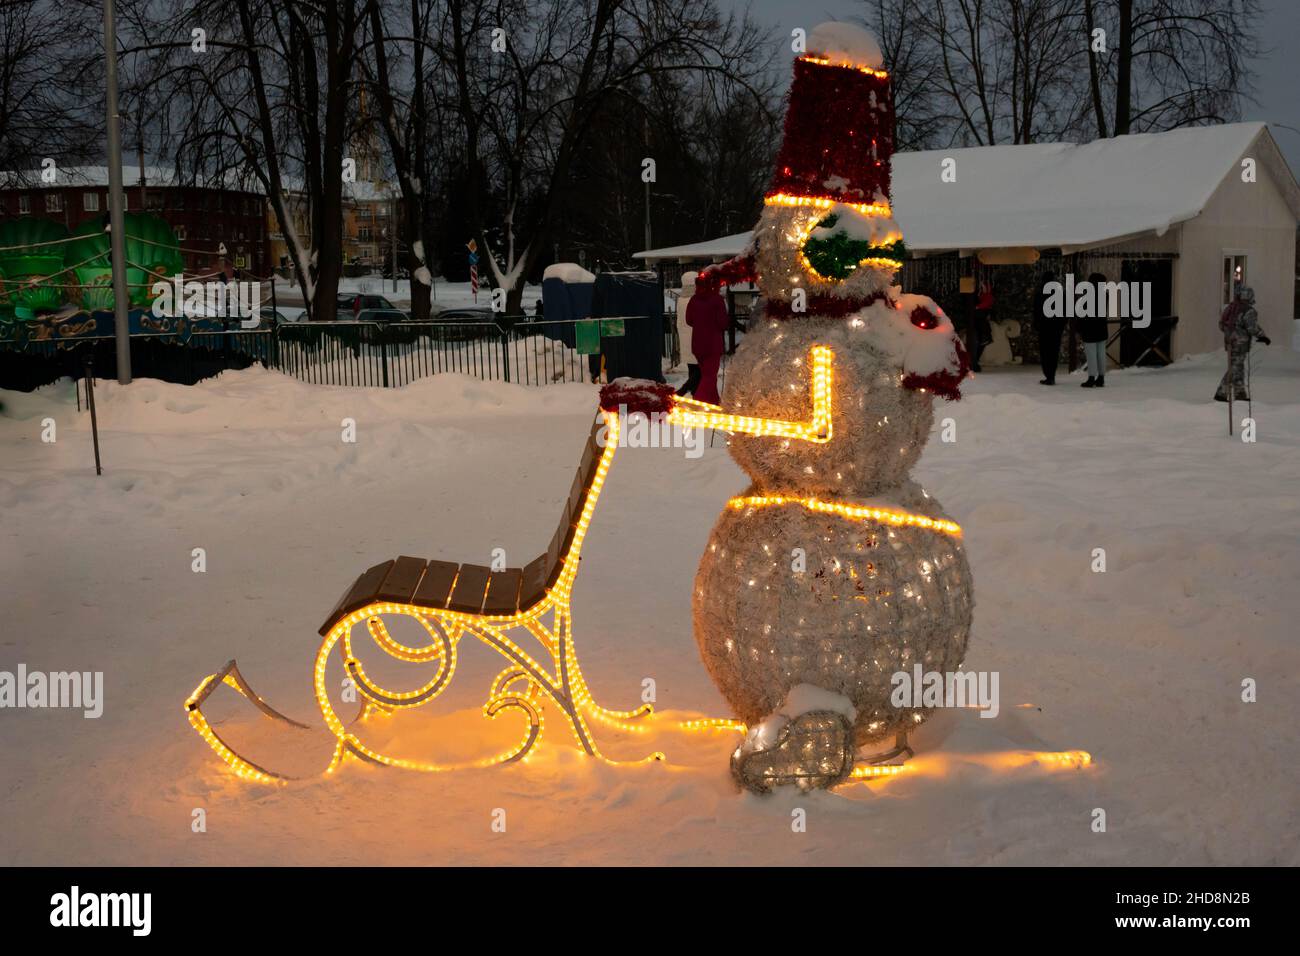 In the evening park, a glowing snowman on a winter sleigh. Stock Photo